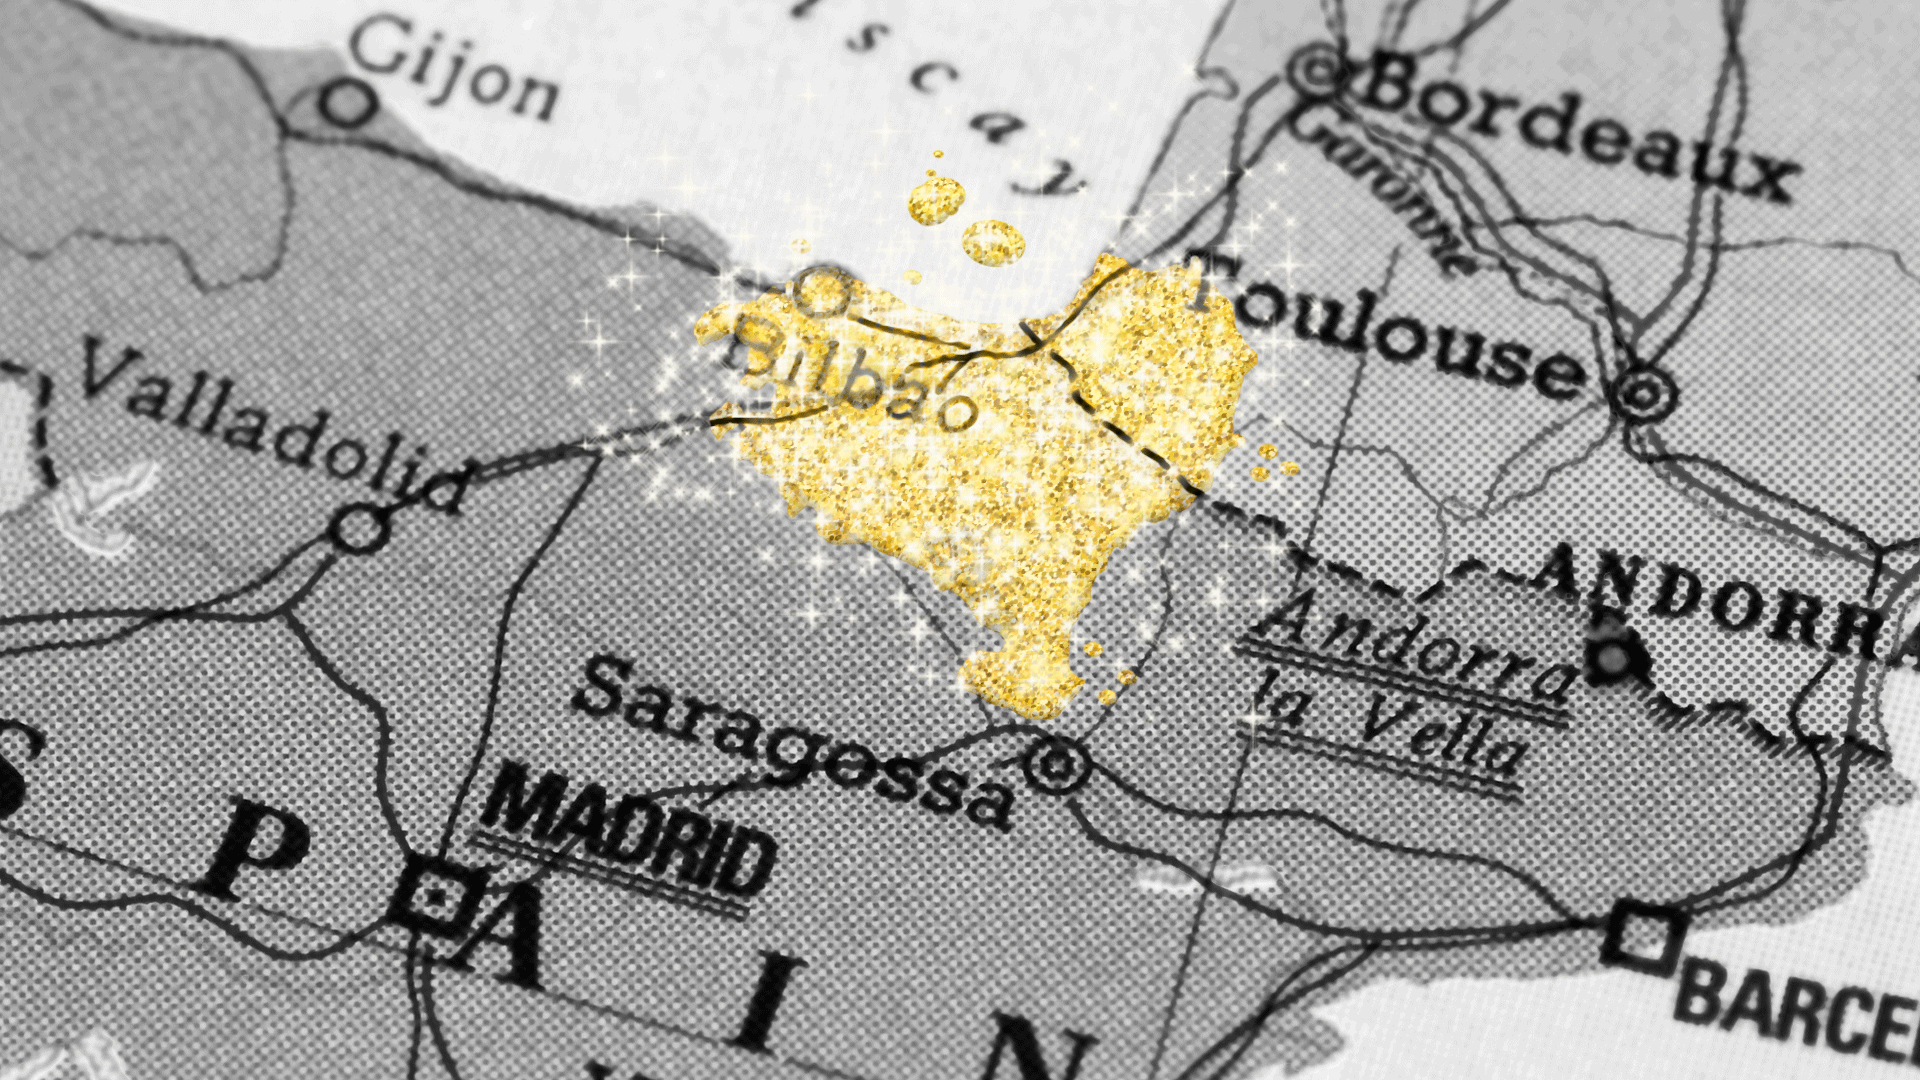 A map of Basque Country, an autonomous community in northern Spain